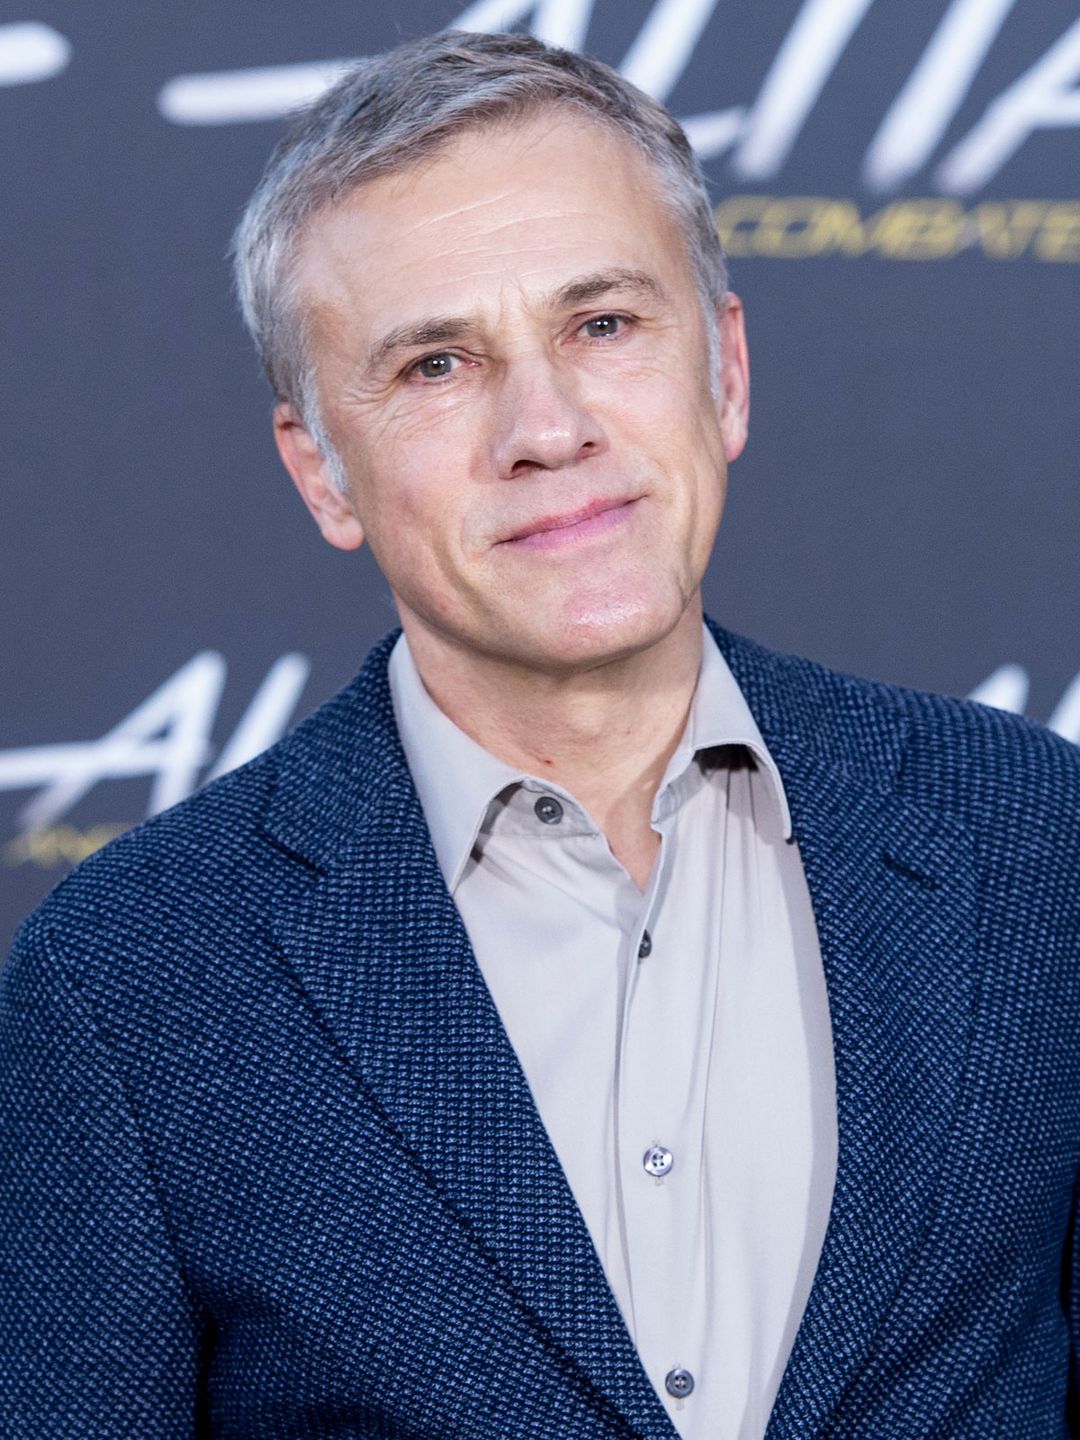 Christoph Waltz early life